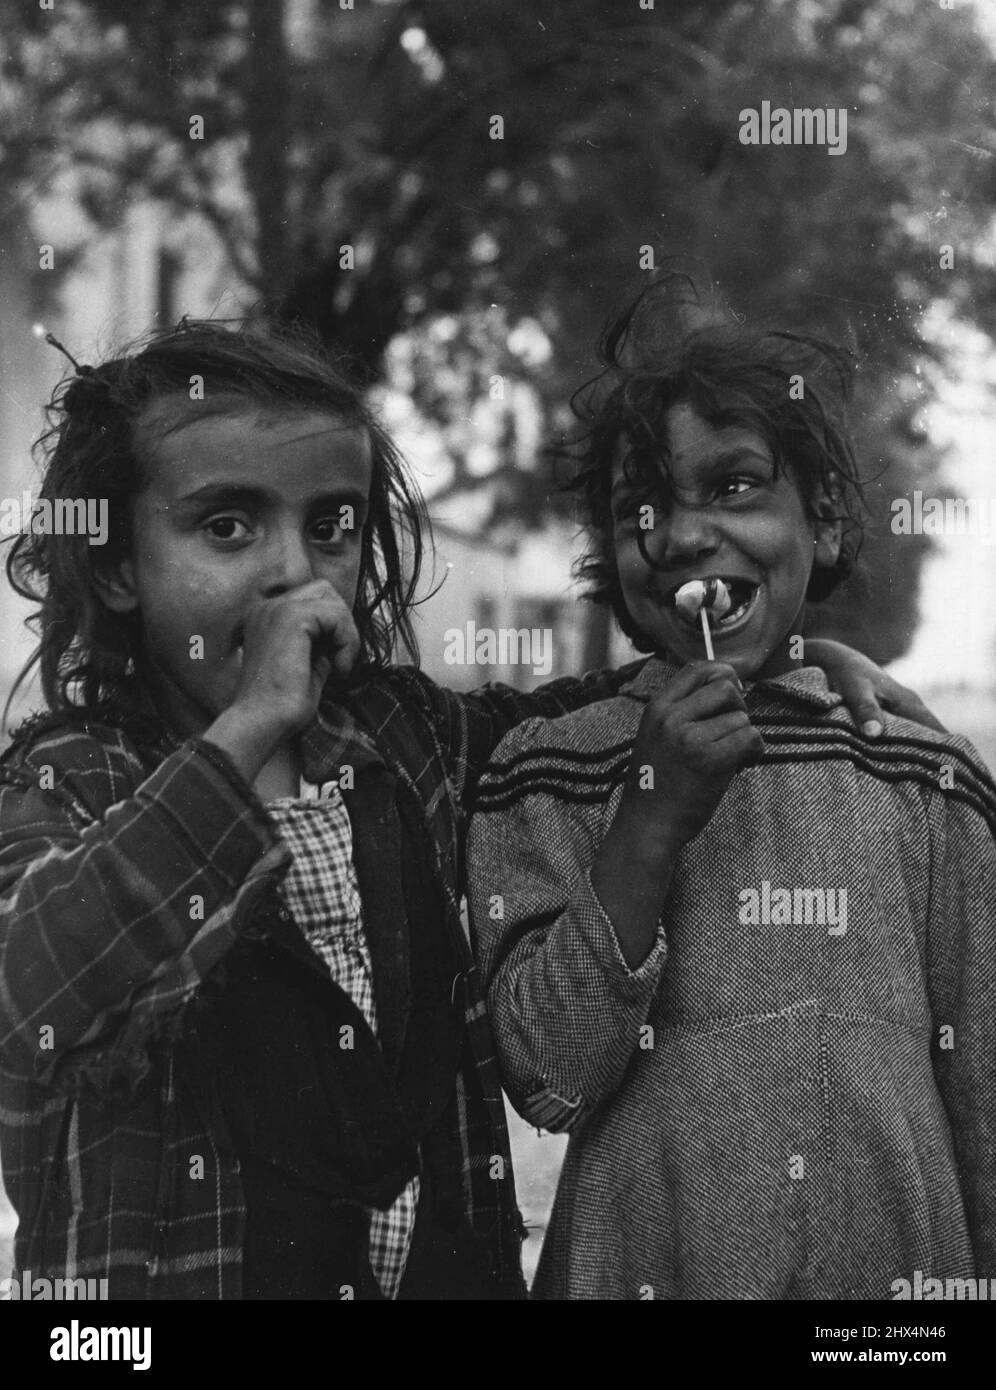 Gipsy Pilgrims - While parents work the gipsy children explore the village and buys sweets from the many pedlars that set up booths for the occasion. August 19, 1949. (Photo by Pictorial Press). Stock Photo